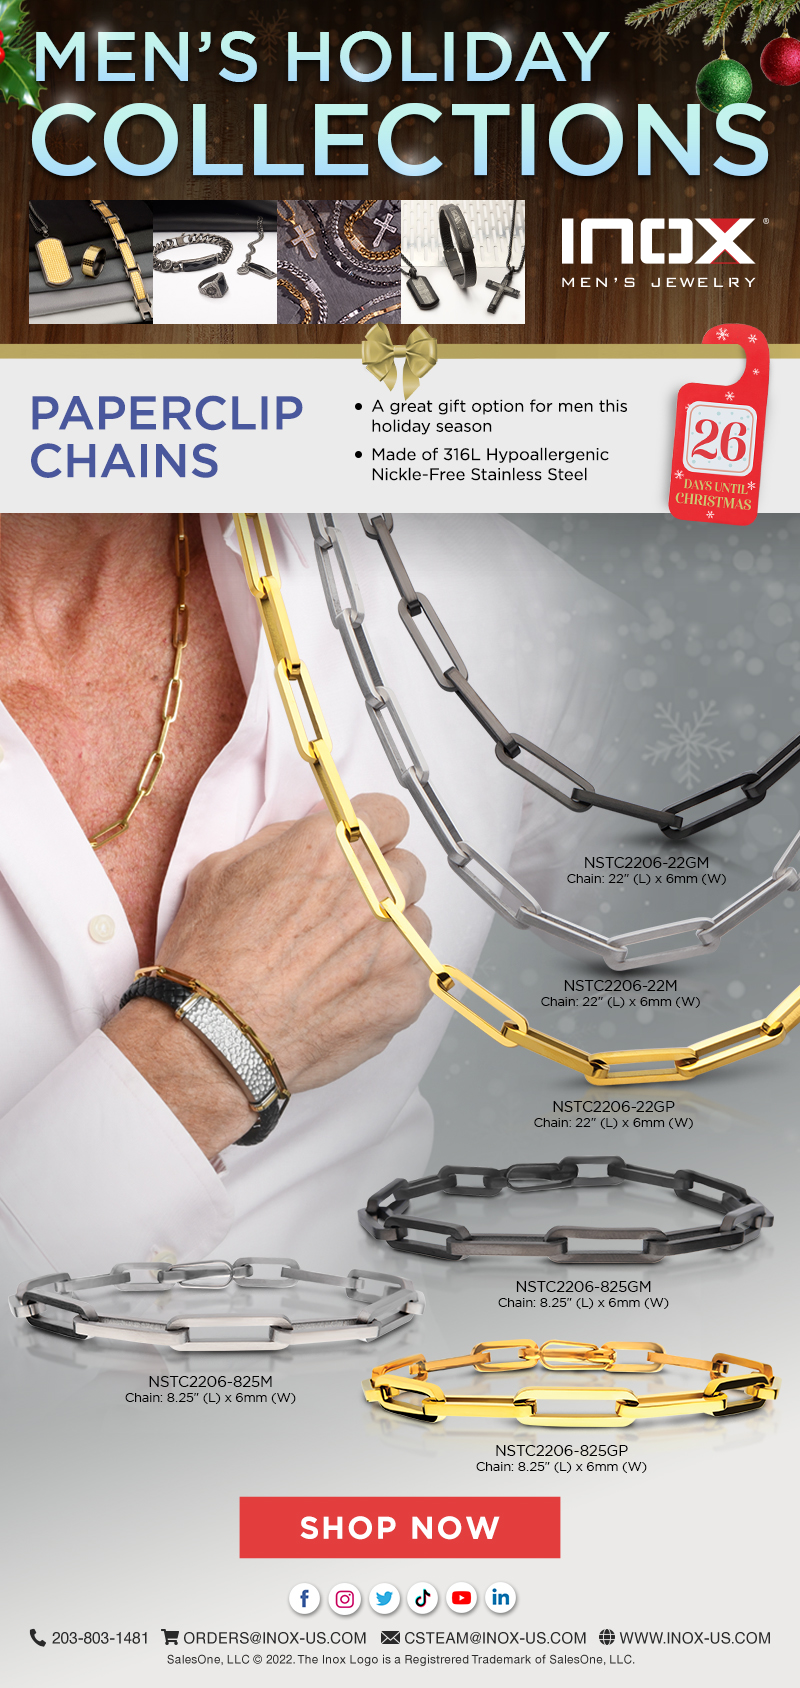 INOX Paperclip Chains - Great Gift Option this Holiday season.